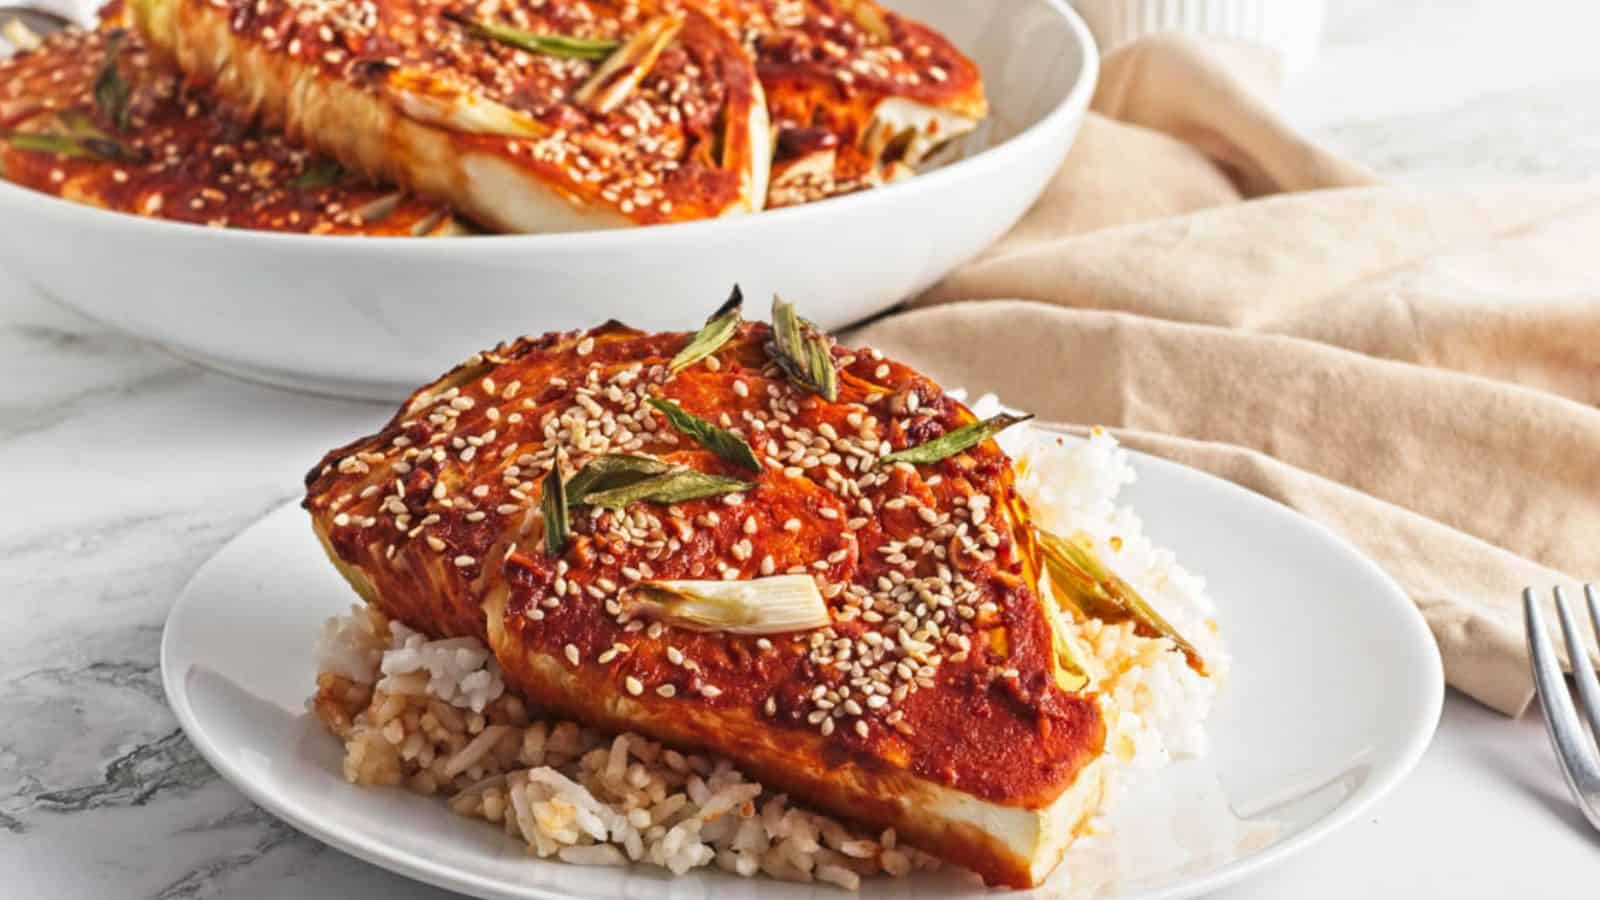 <p>Spice up your dinner with our Gochujang Cabbage Steaks which are crispy, flavorful, and oh-so-delicious. Made with thick slices of cabbage roasted with spicy gochujang sauce, they’re a tasty and nutritious side dish or main course. Serve them alongside rice or grilled meat for a complete and pleasing meal that’s sure to impress.<br><strong>Get the Recipe: </strong><a href="https://twocityvegans.com/gochujang-cabbage-steaks/?utm_source=msn&utm_medium=page&utm_campaign=msn" rel="noopener">Gochujang Cabbage Steaks</a></p> <p>The post <a rel="nofollow" href="https://www.splashoftaste.com/tour-the-world/">Tour The World: 15 Must-try Dinner Recipes</a> appeared first on <a rel="nofollow" href="https://www.splashoftaste.com">Splash of Taste - Vegetarian Recipes</a>.</p>